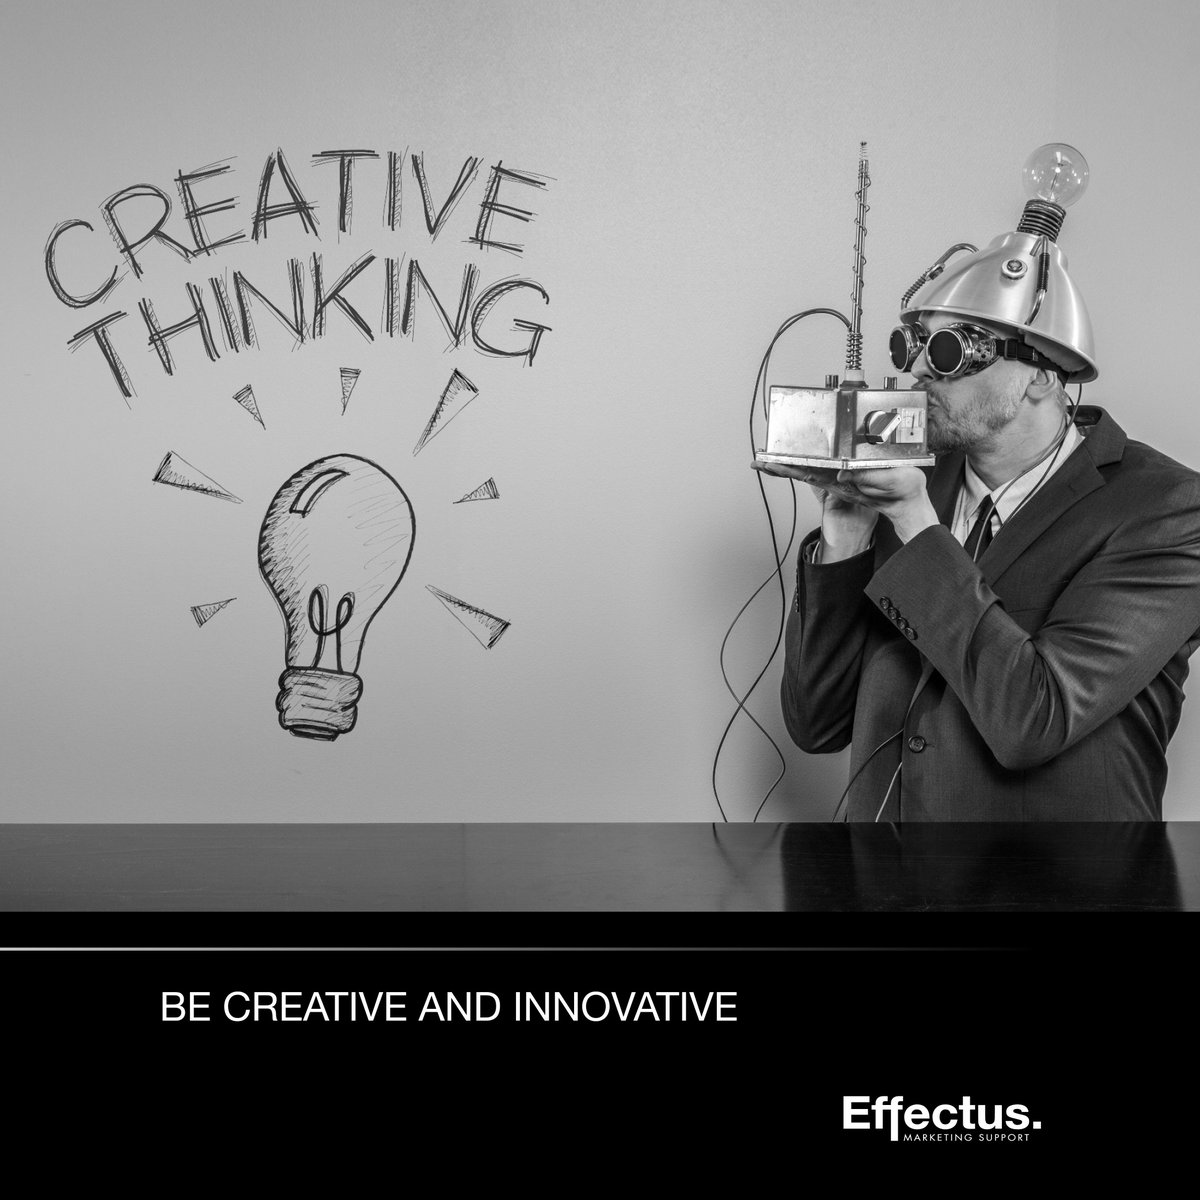 Be creative and innovative

Don't be afraid to think outside the box and try new things. The most memorable brands are the ones that are creative and innovative in their branding and marketing.

#effectusgroup #branding #marketing #brandingtips #marketingtips